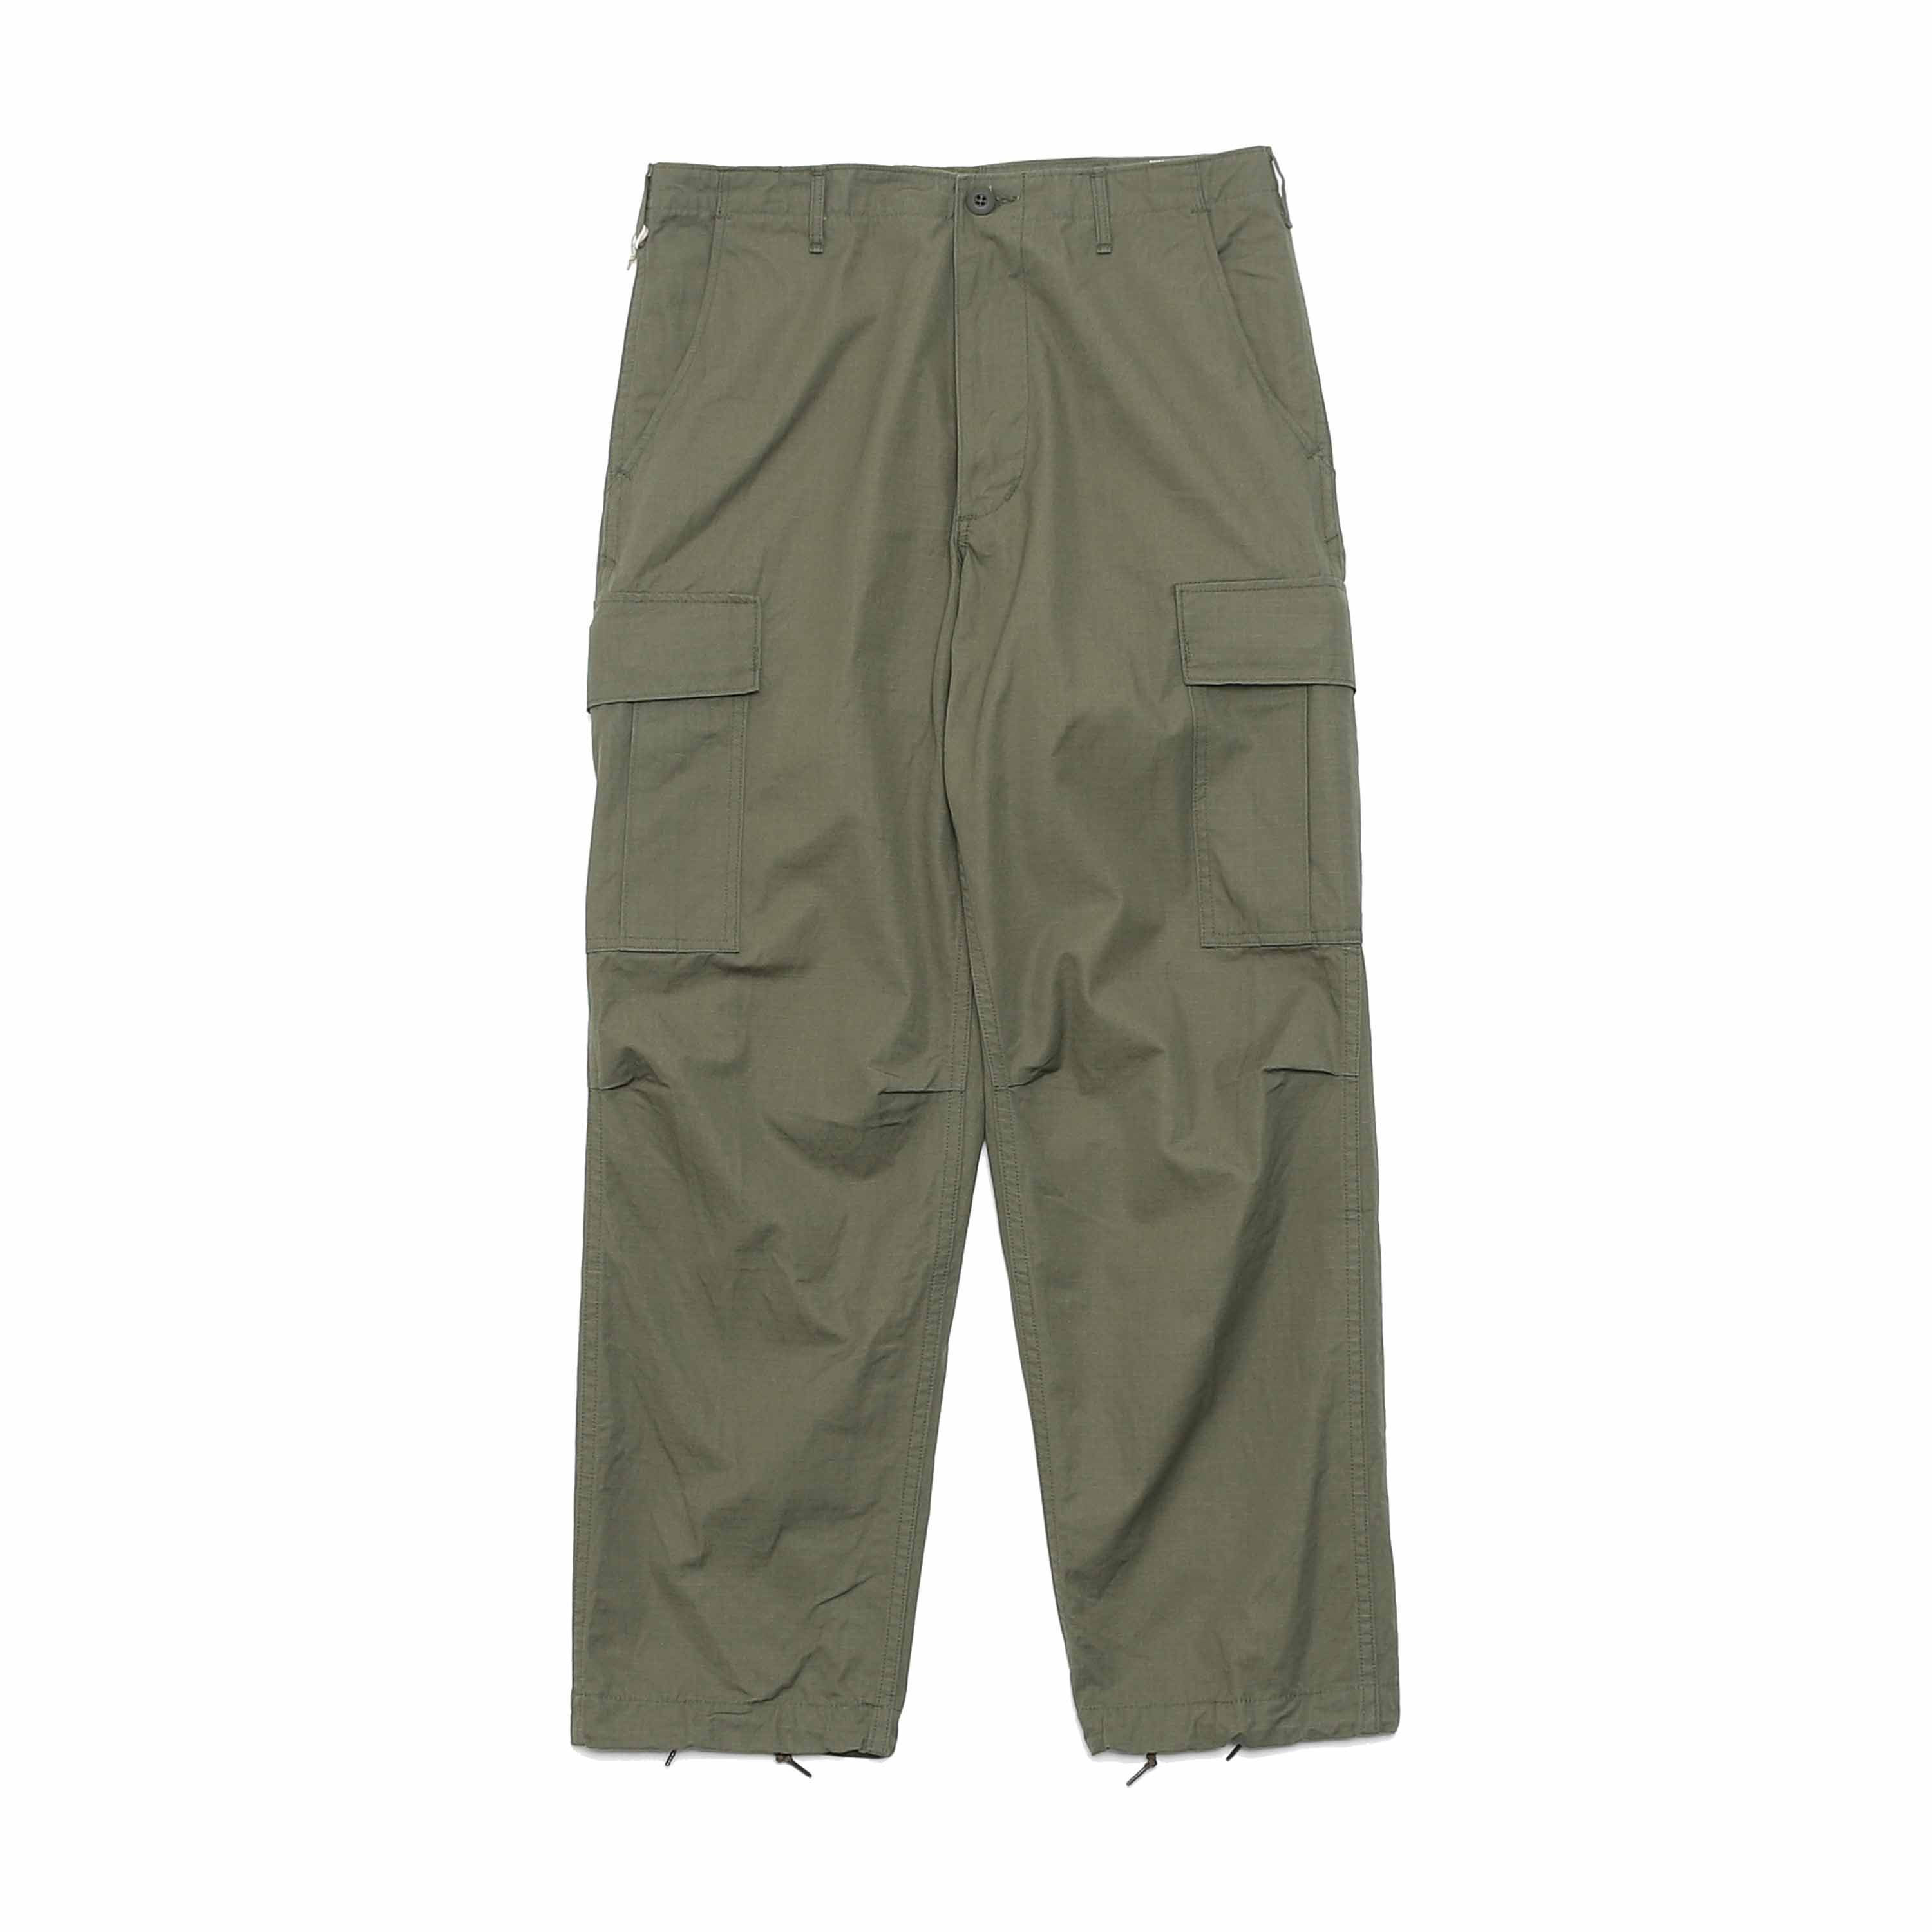 VINTAGE FIT 6 POCKET CARGO PANTS - ARMY GREEN